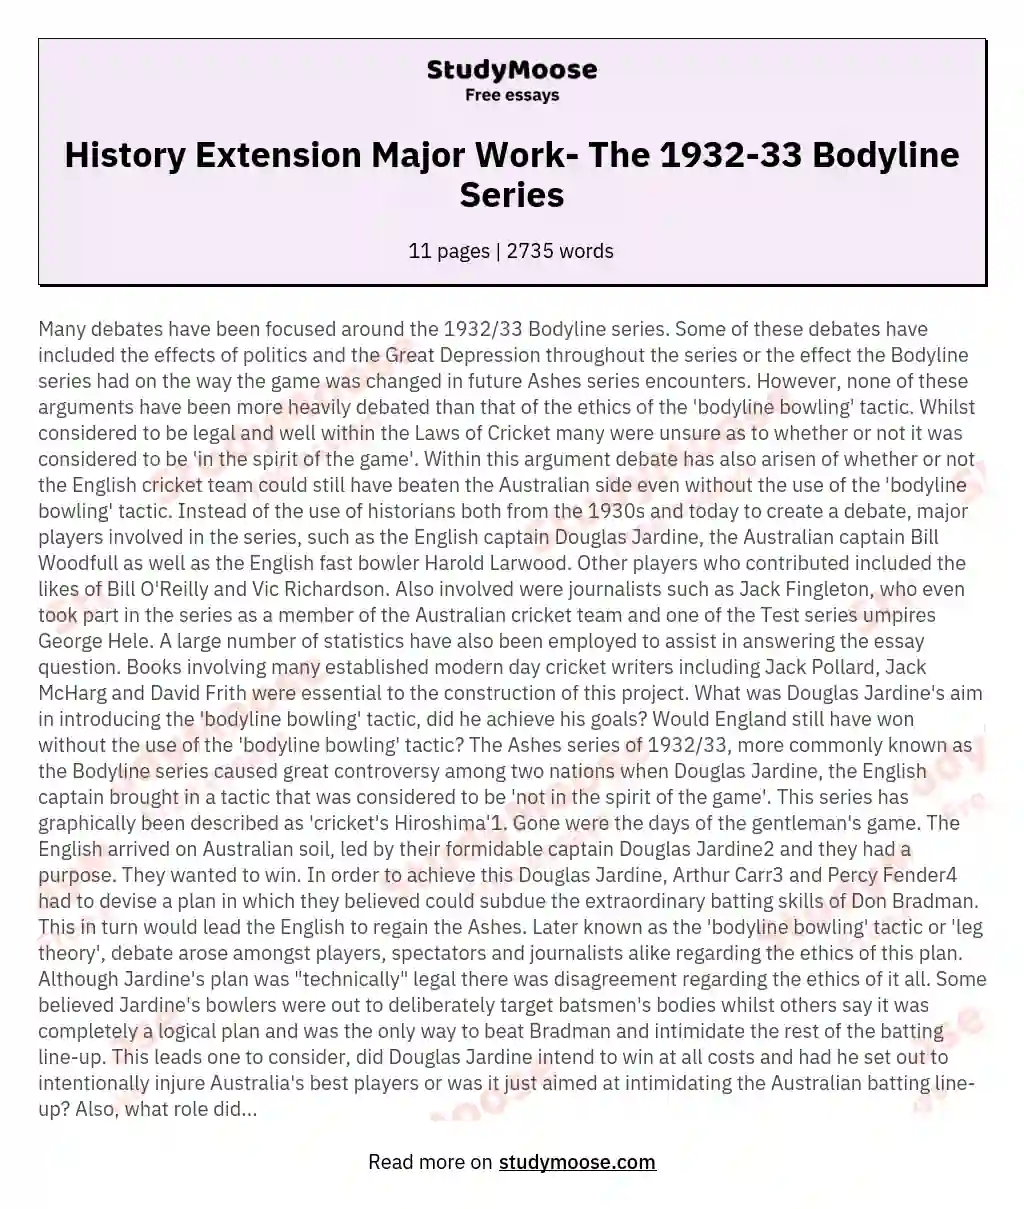 History Extension Major Work- The 1932-33 Bodyline Series essay